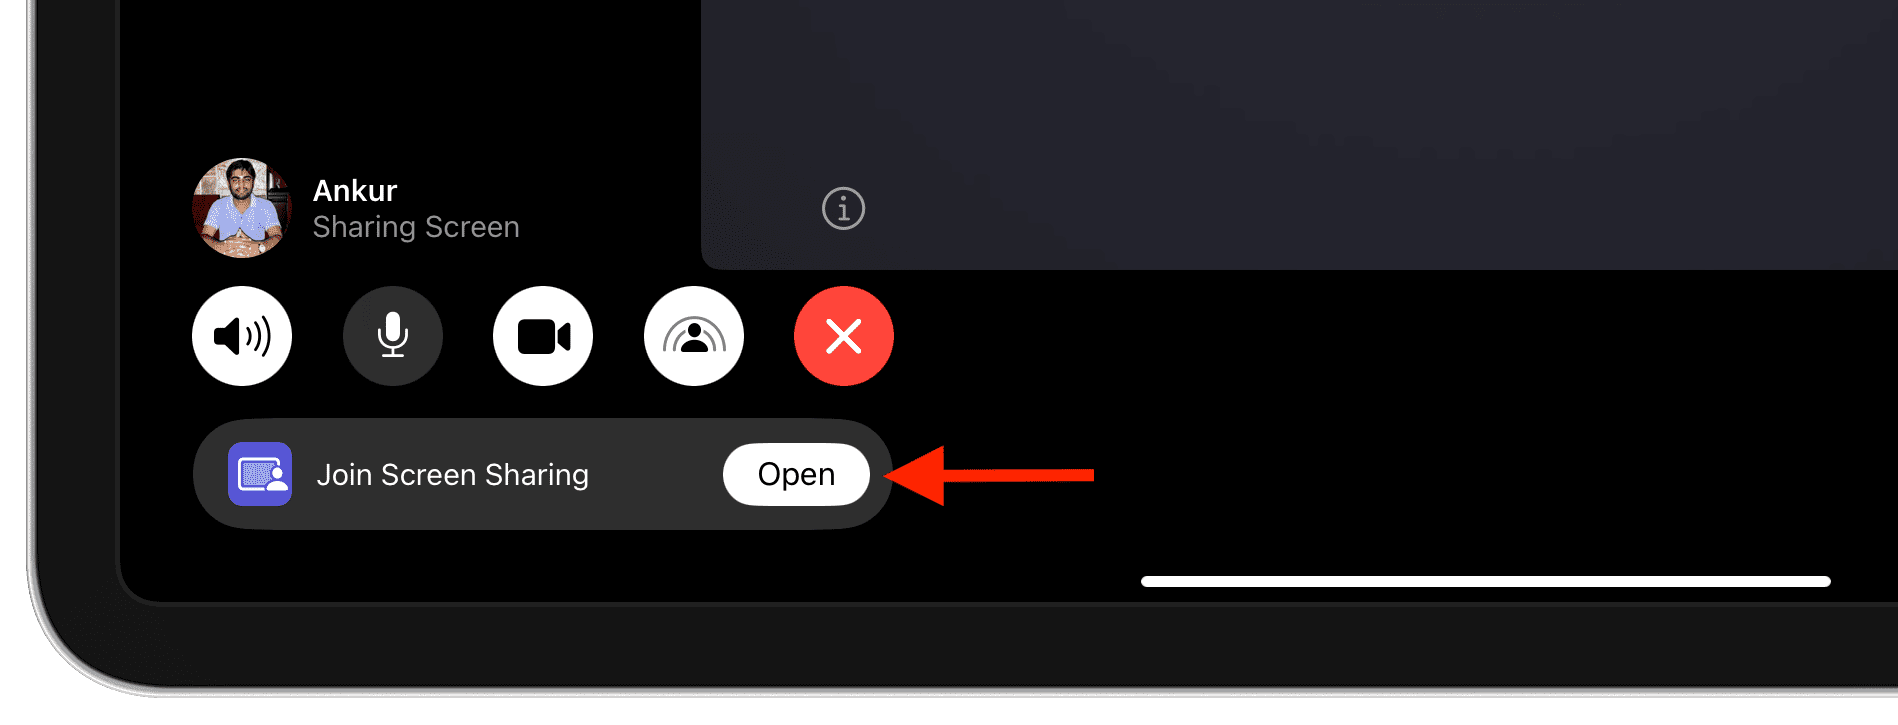 Tap Open next to Join Screen Sharing during a FaceTime call